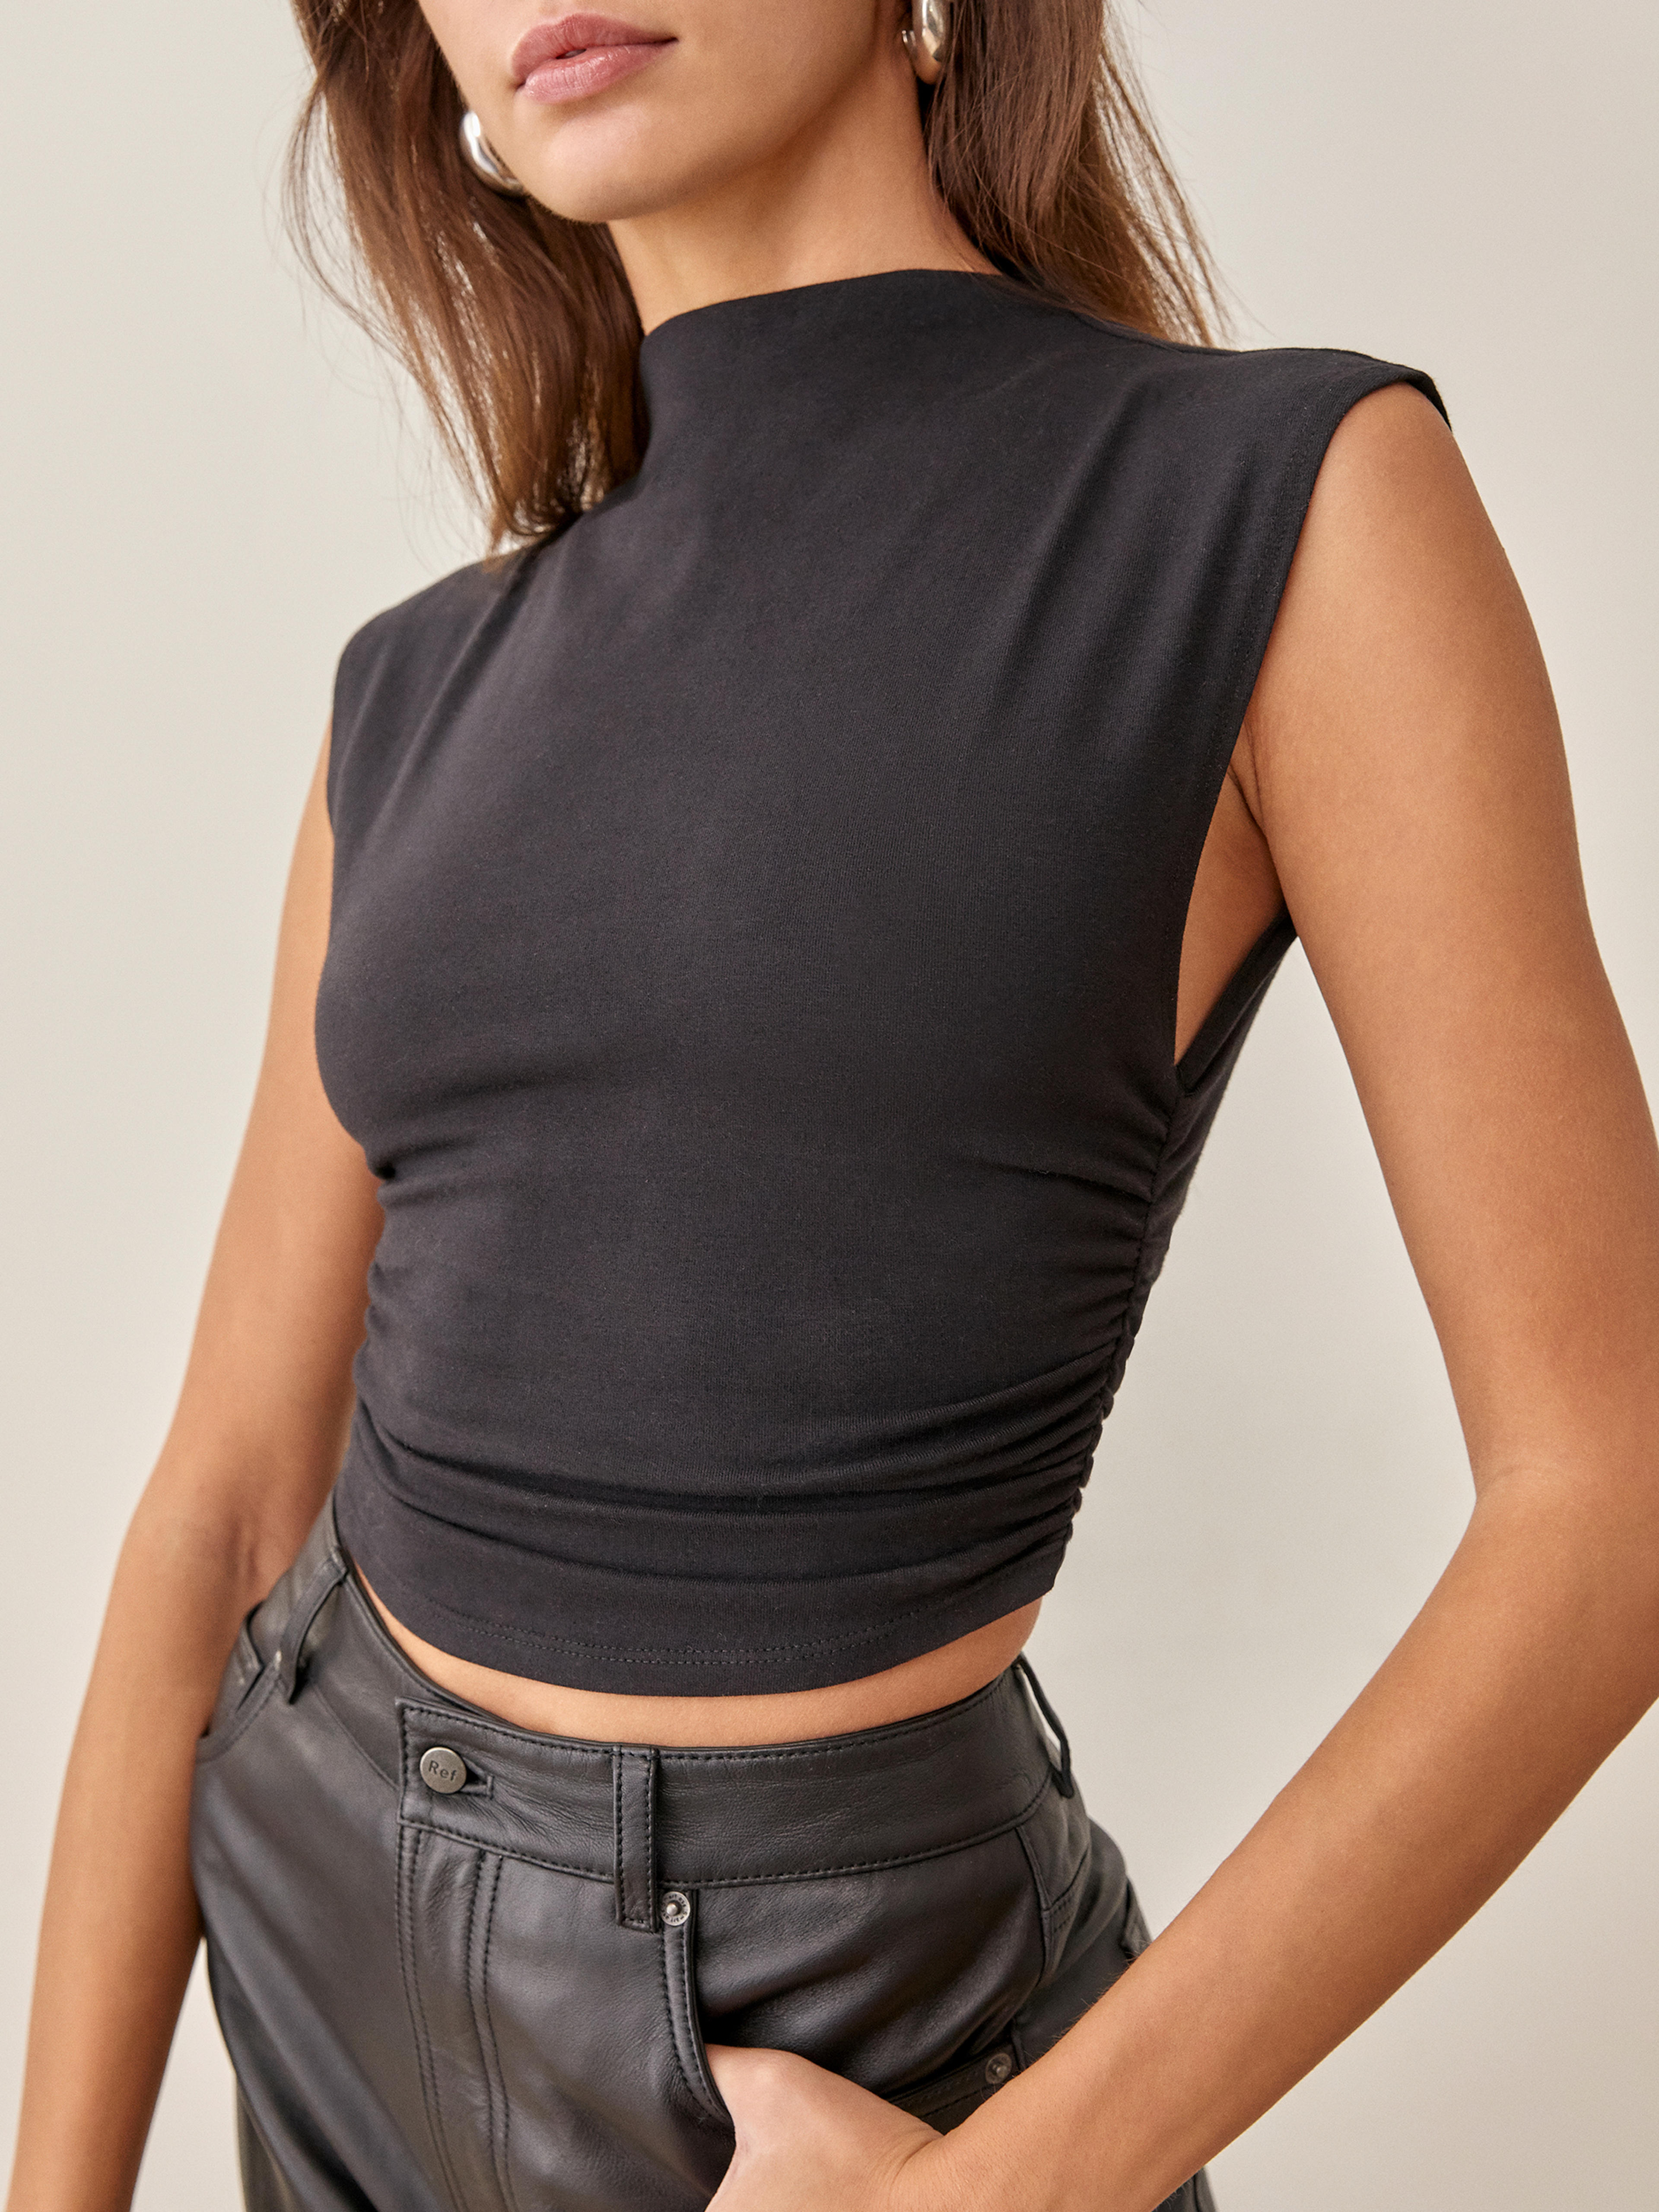 Lindy Knit Top - Sleeveless | Reformation